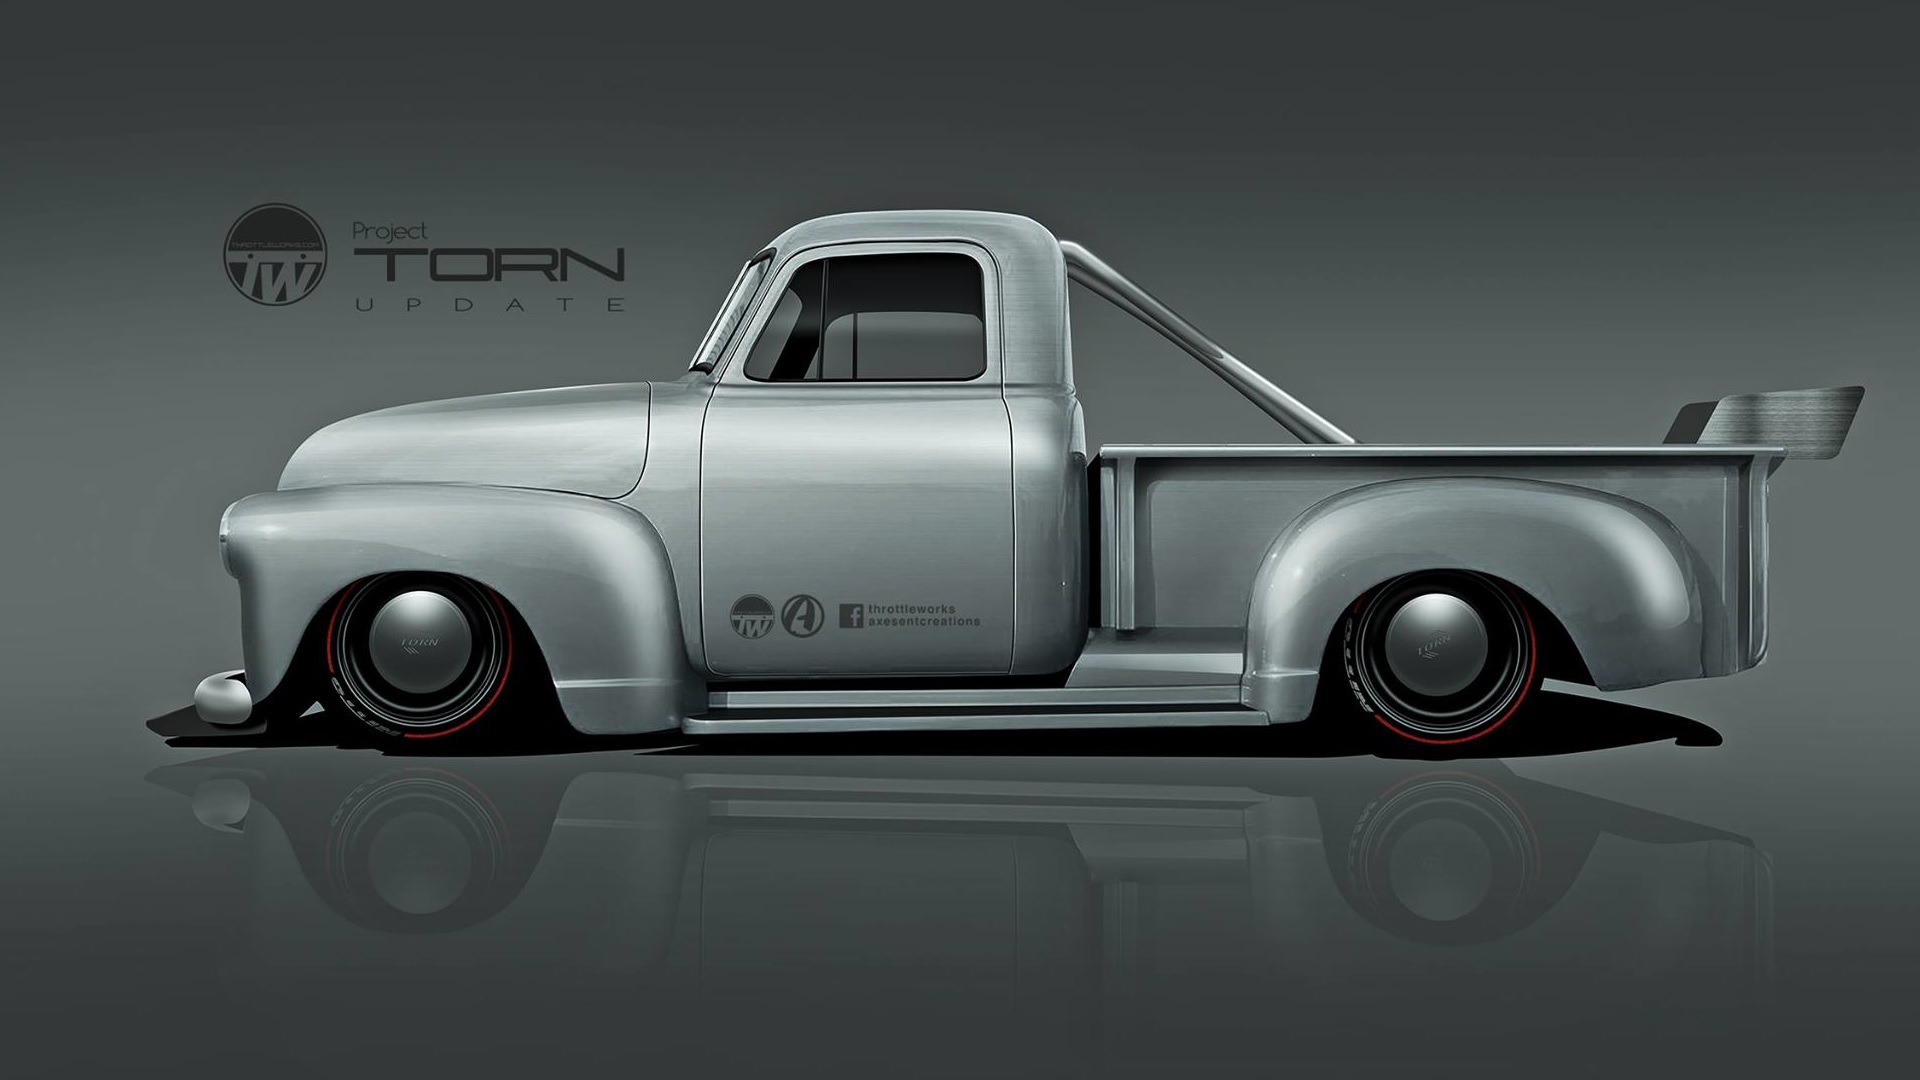 General 1920x1080 1954 Chevrolet pickup trucks CGI Axesent Creations American cars Chevrolet side view silver cars classic car digital art simple background watermarked